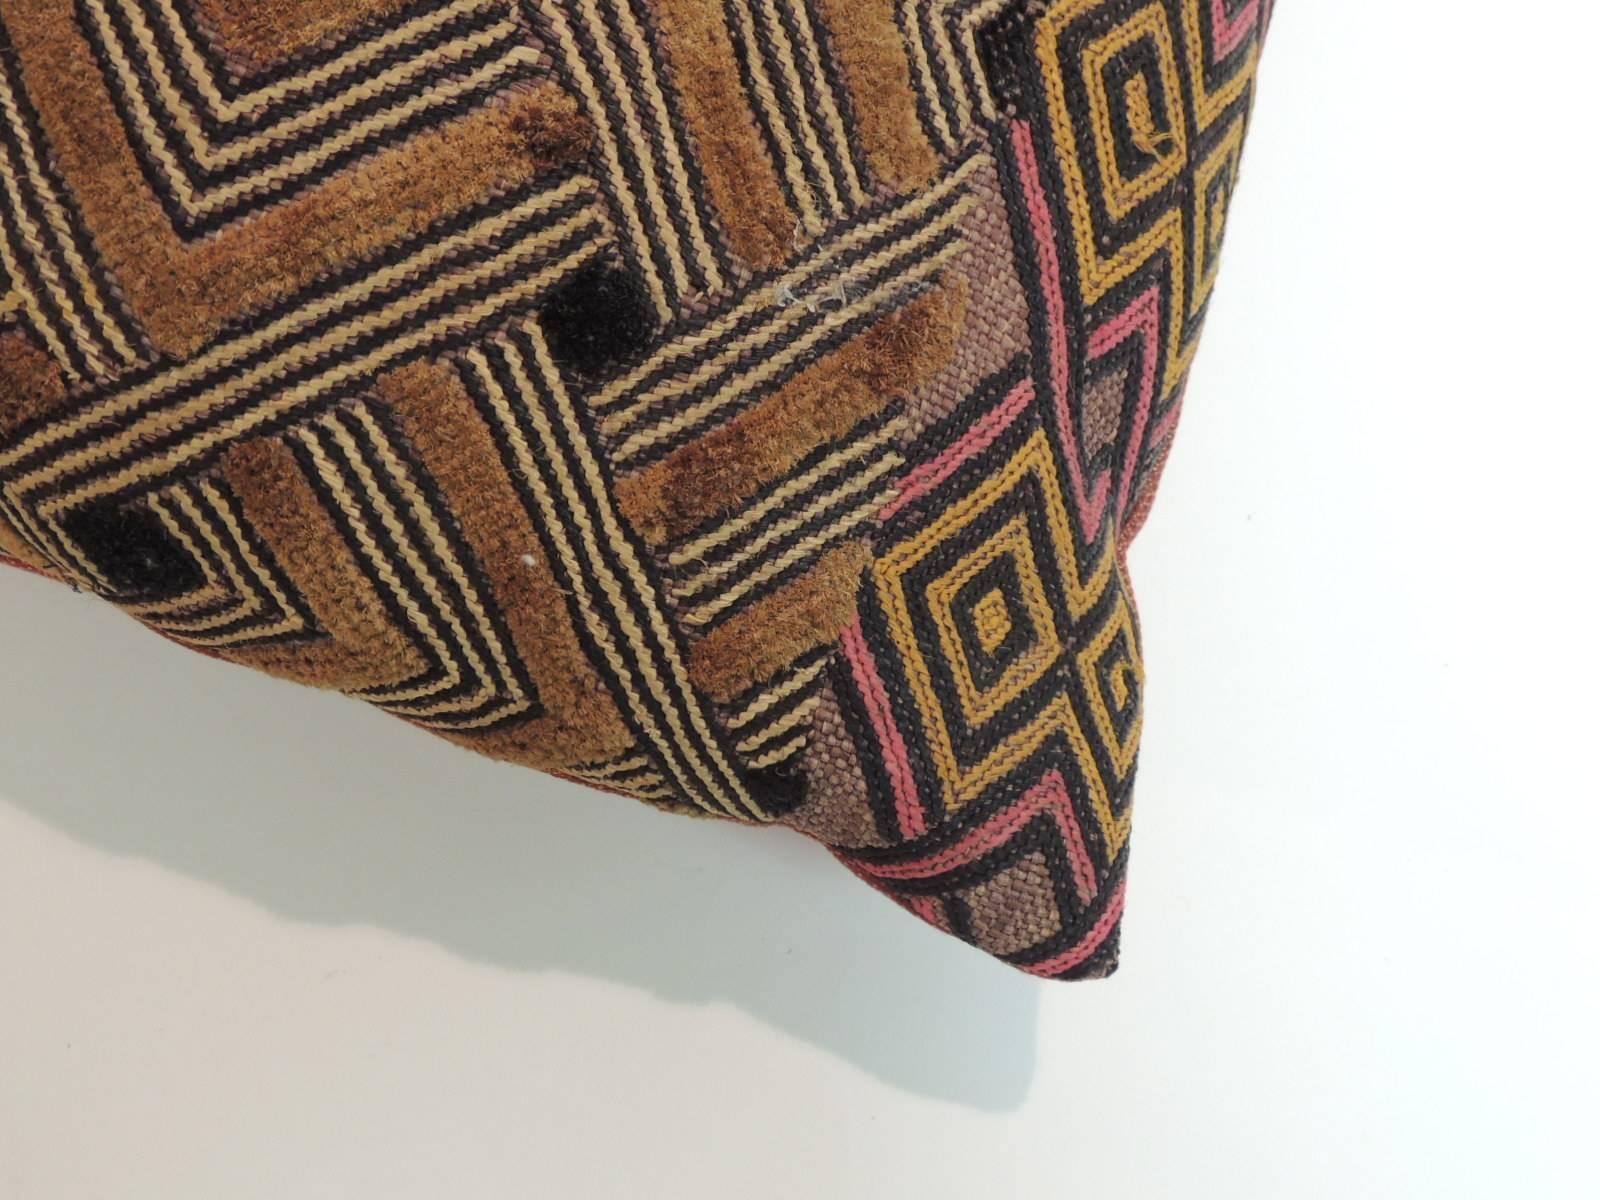 Tribal Vintage African Woven Embroidered Decorative Pillow